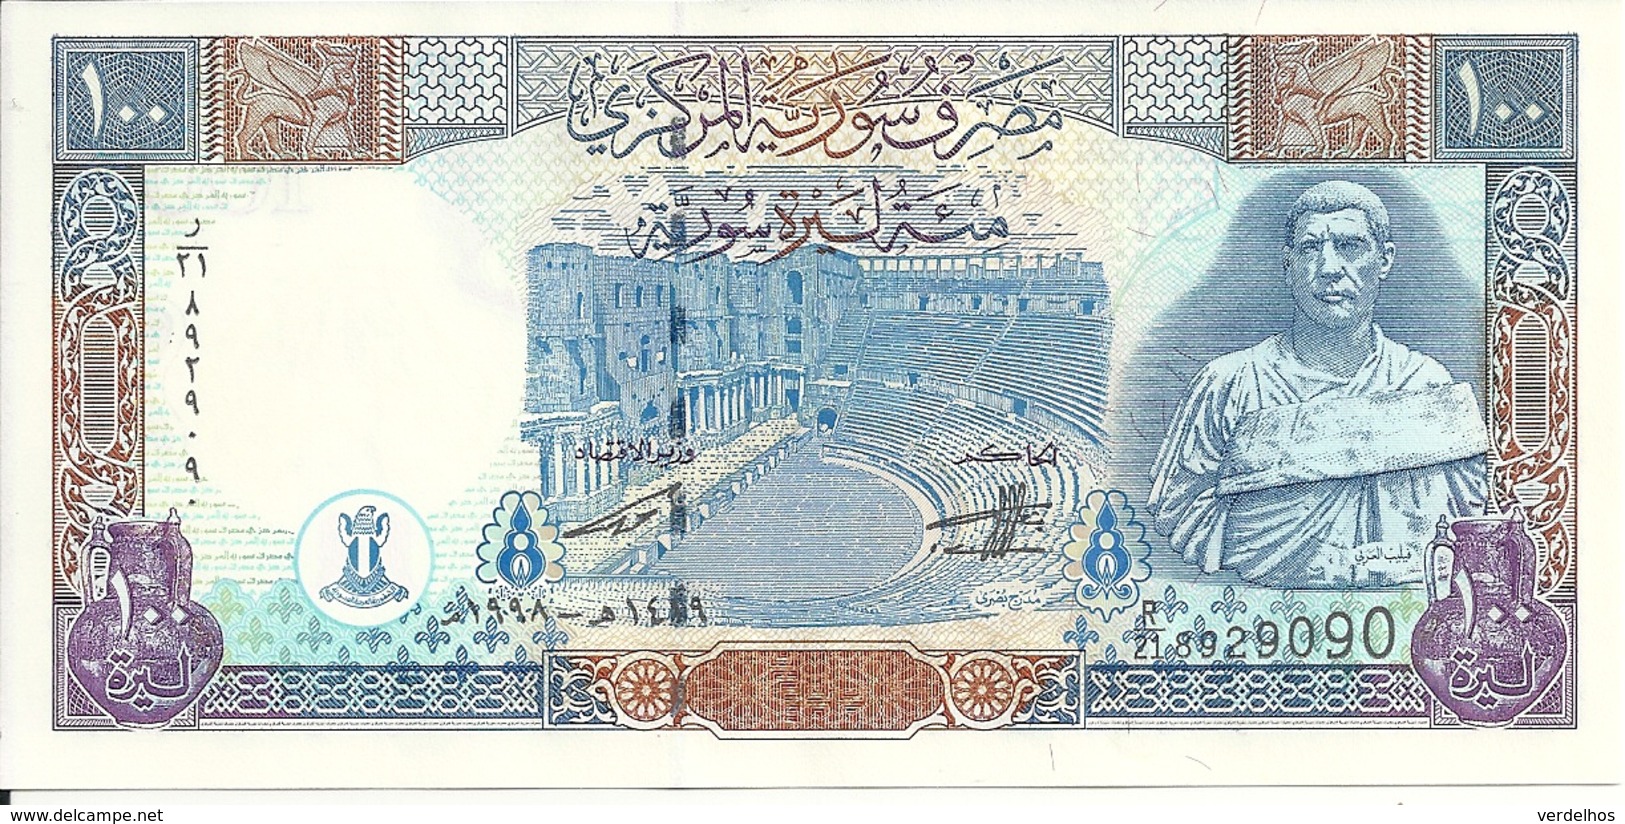 SYRIE 100 POUNDS 1998 UNC P 108 - Syrie